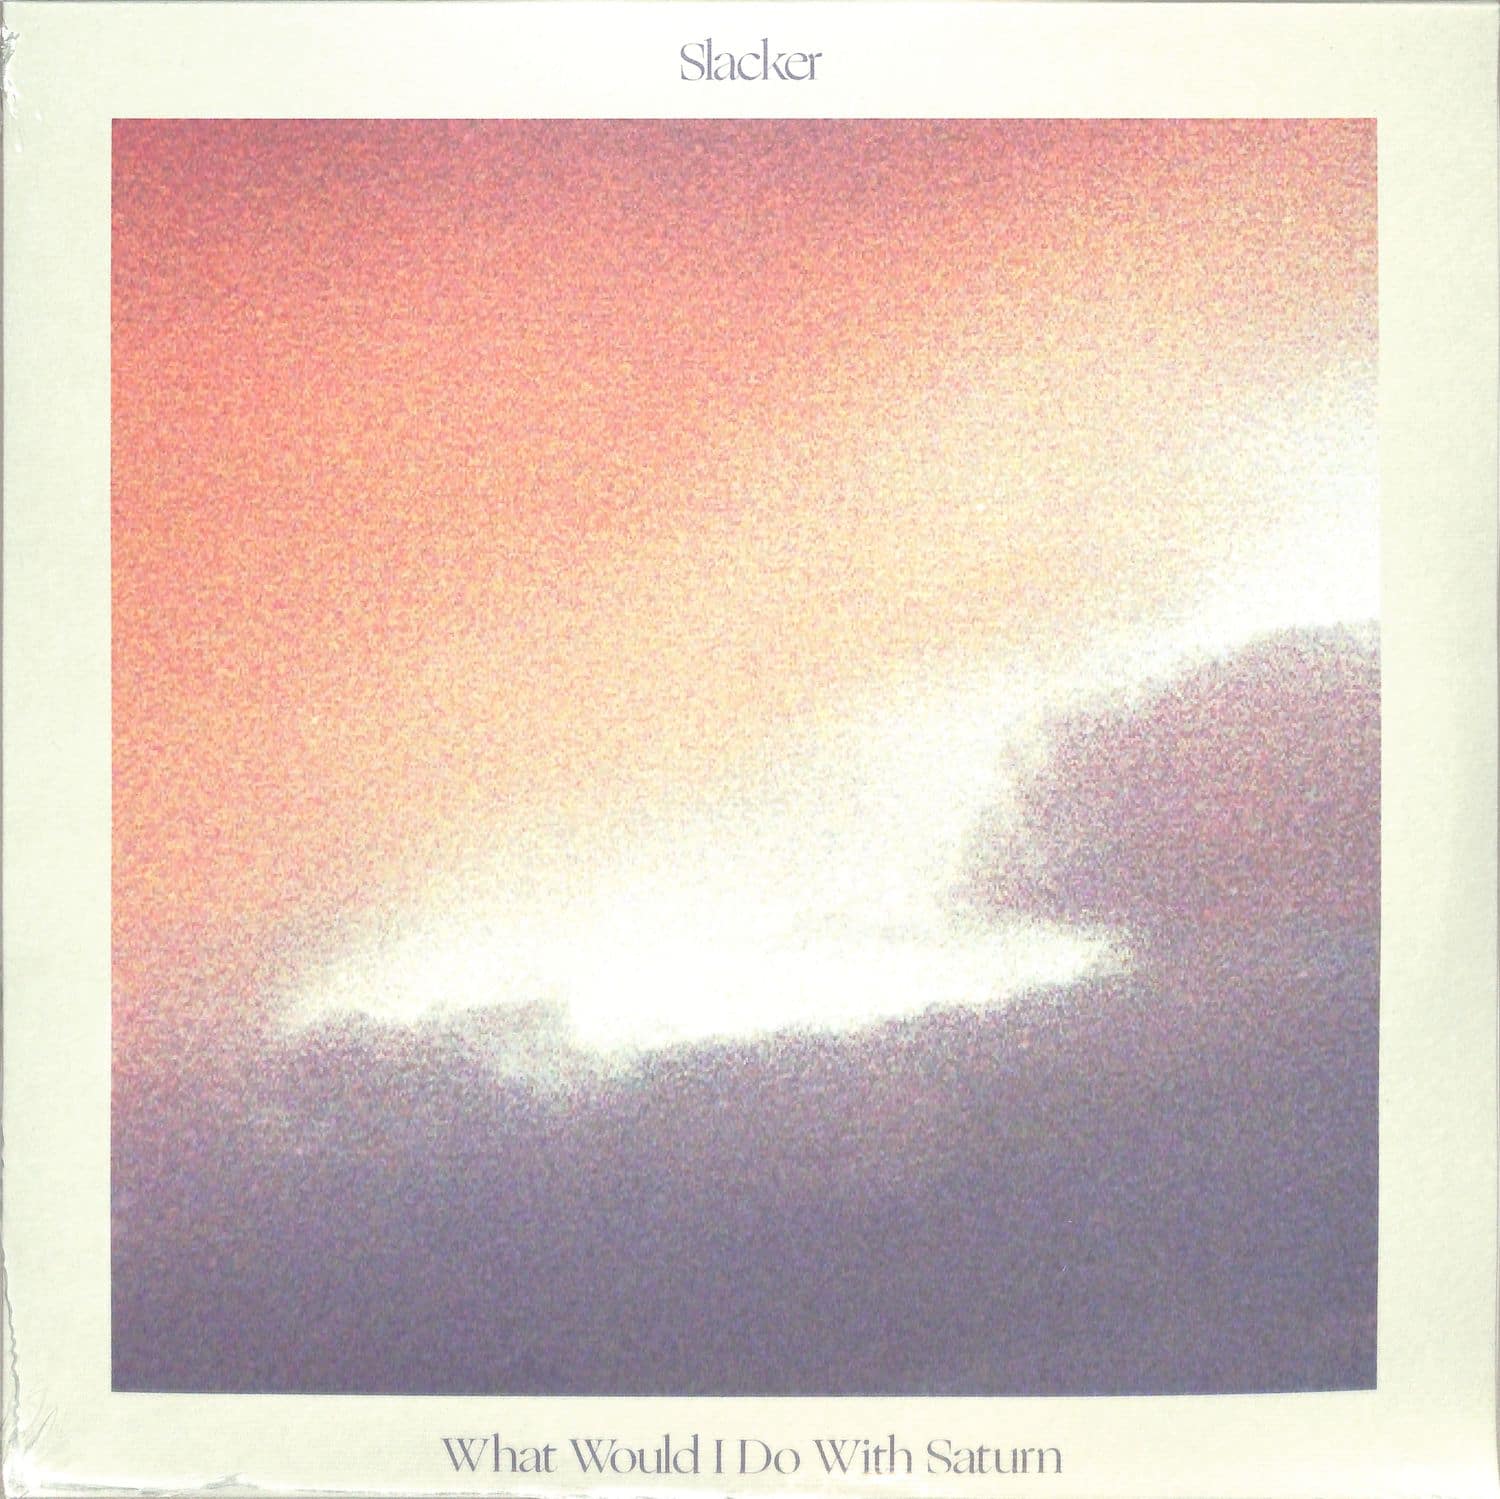 Slacker - WHAT WOULD I DO WITH SATURN 